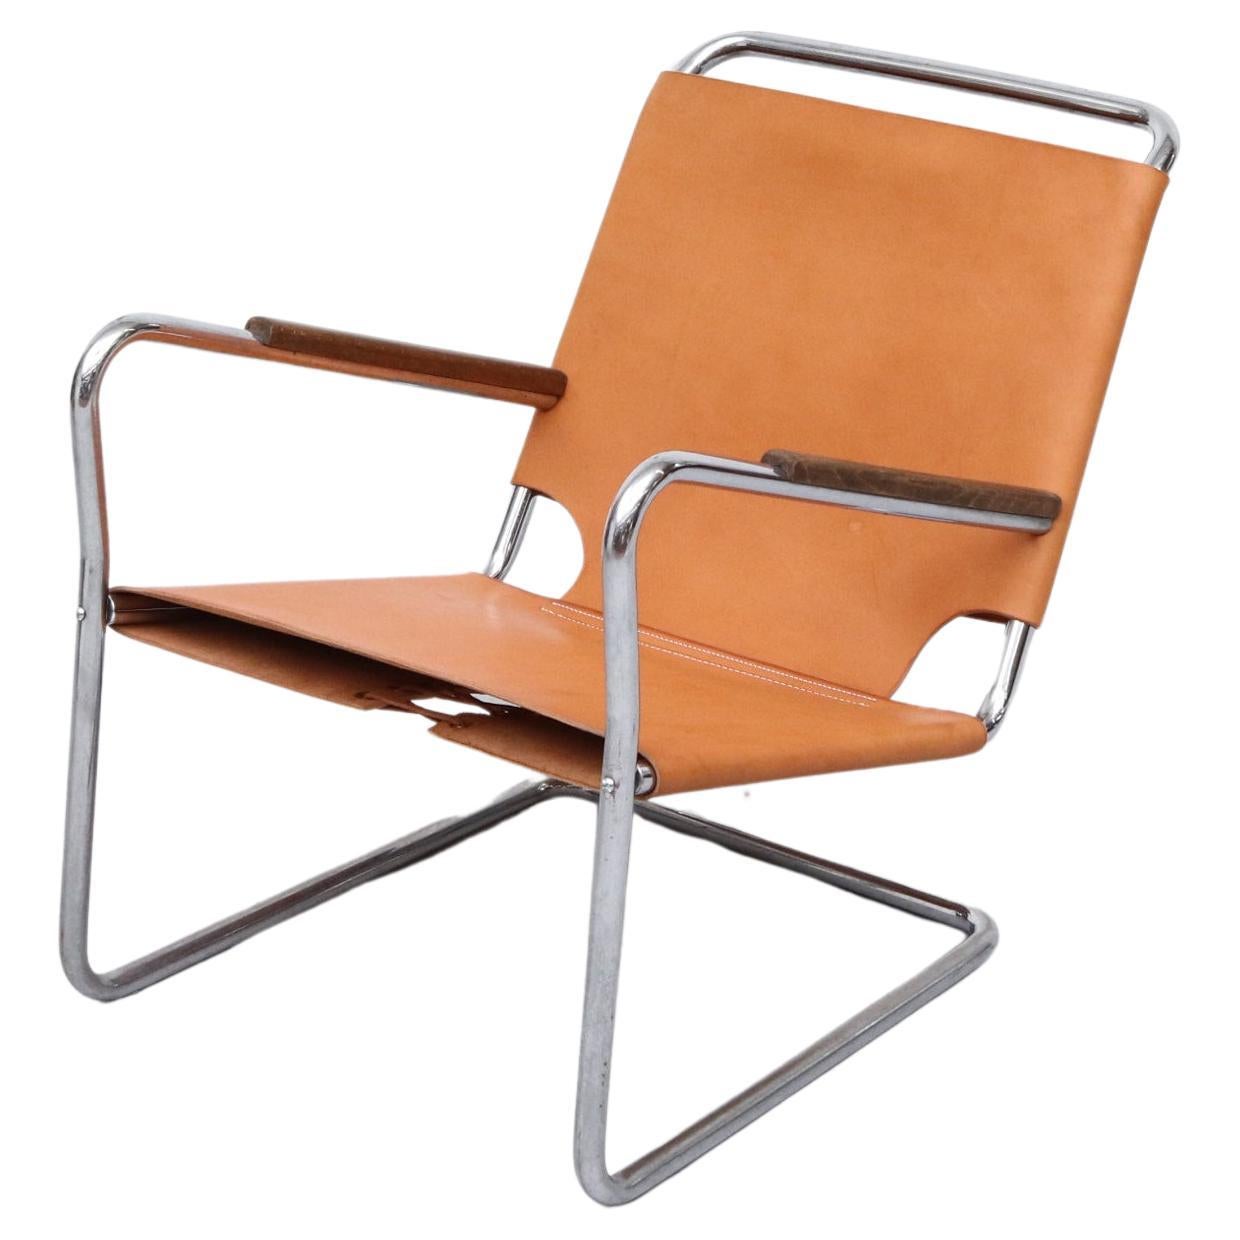 1930s Bas Van Pelt Leather and Chrome Tubular Lounge Chair with Wood Armrests For Sale